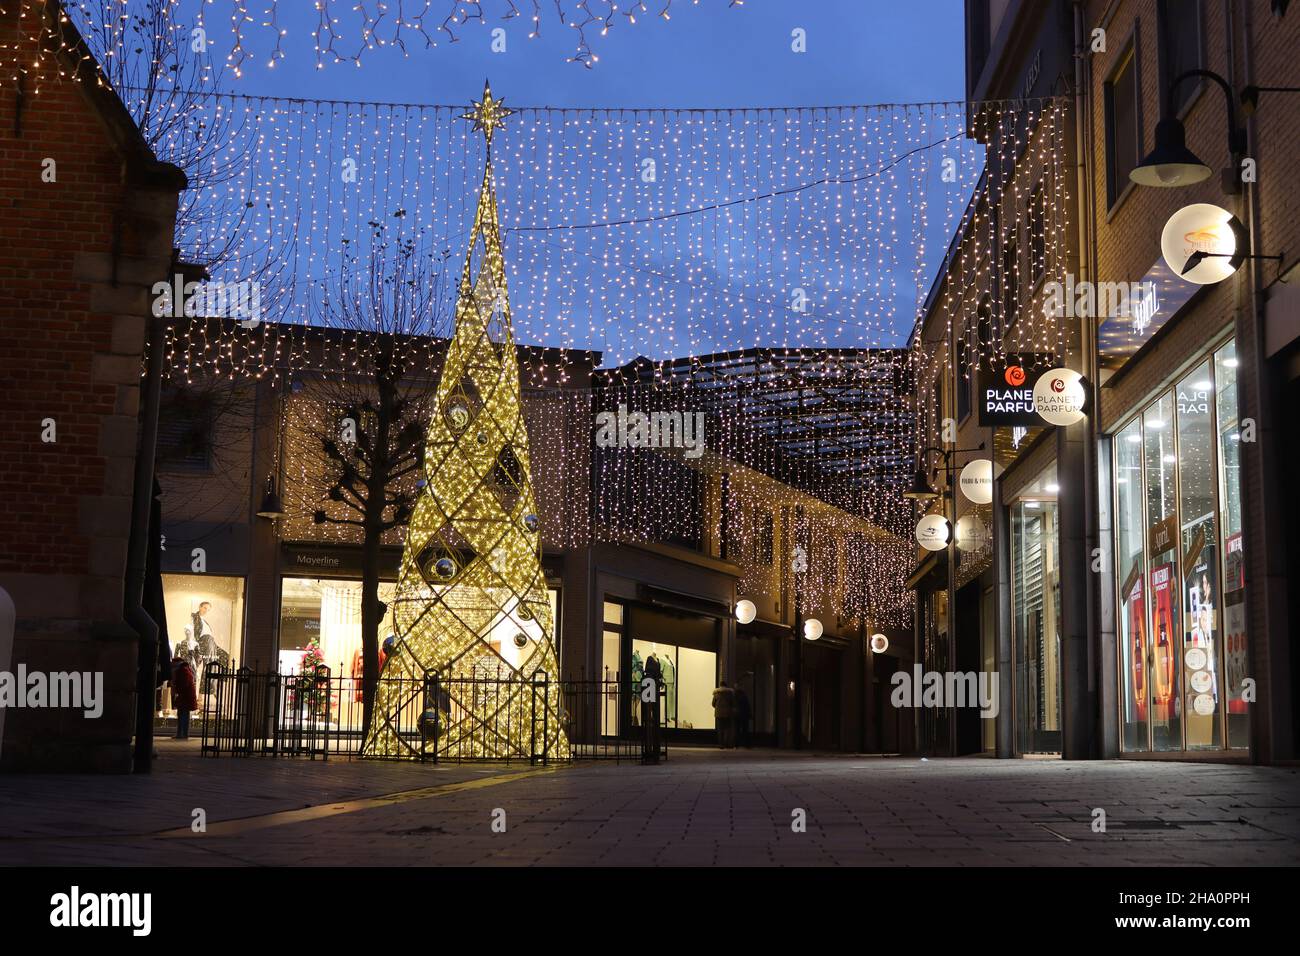 AALST, BELGIUM, 5 DECEMBER 2021: View of Pieter van Aelst Shopping Centre in Aalst, East Flanders at night during the holiday season. It is one of the Stock Photo